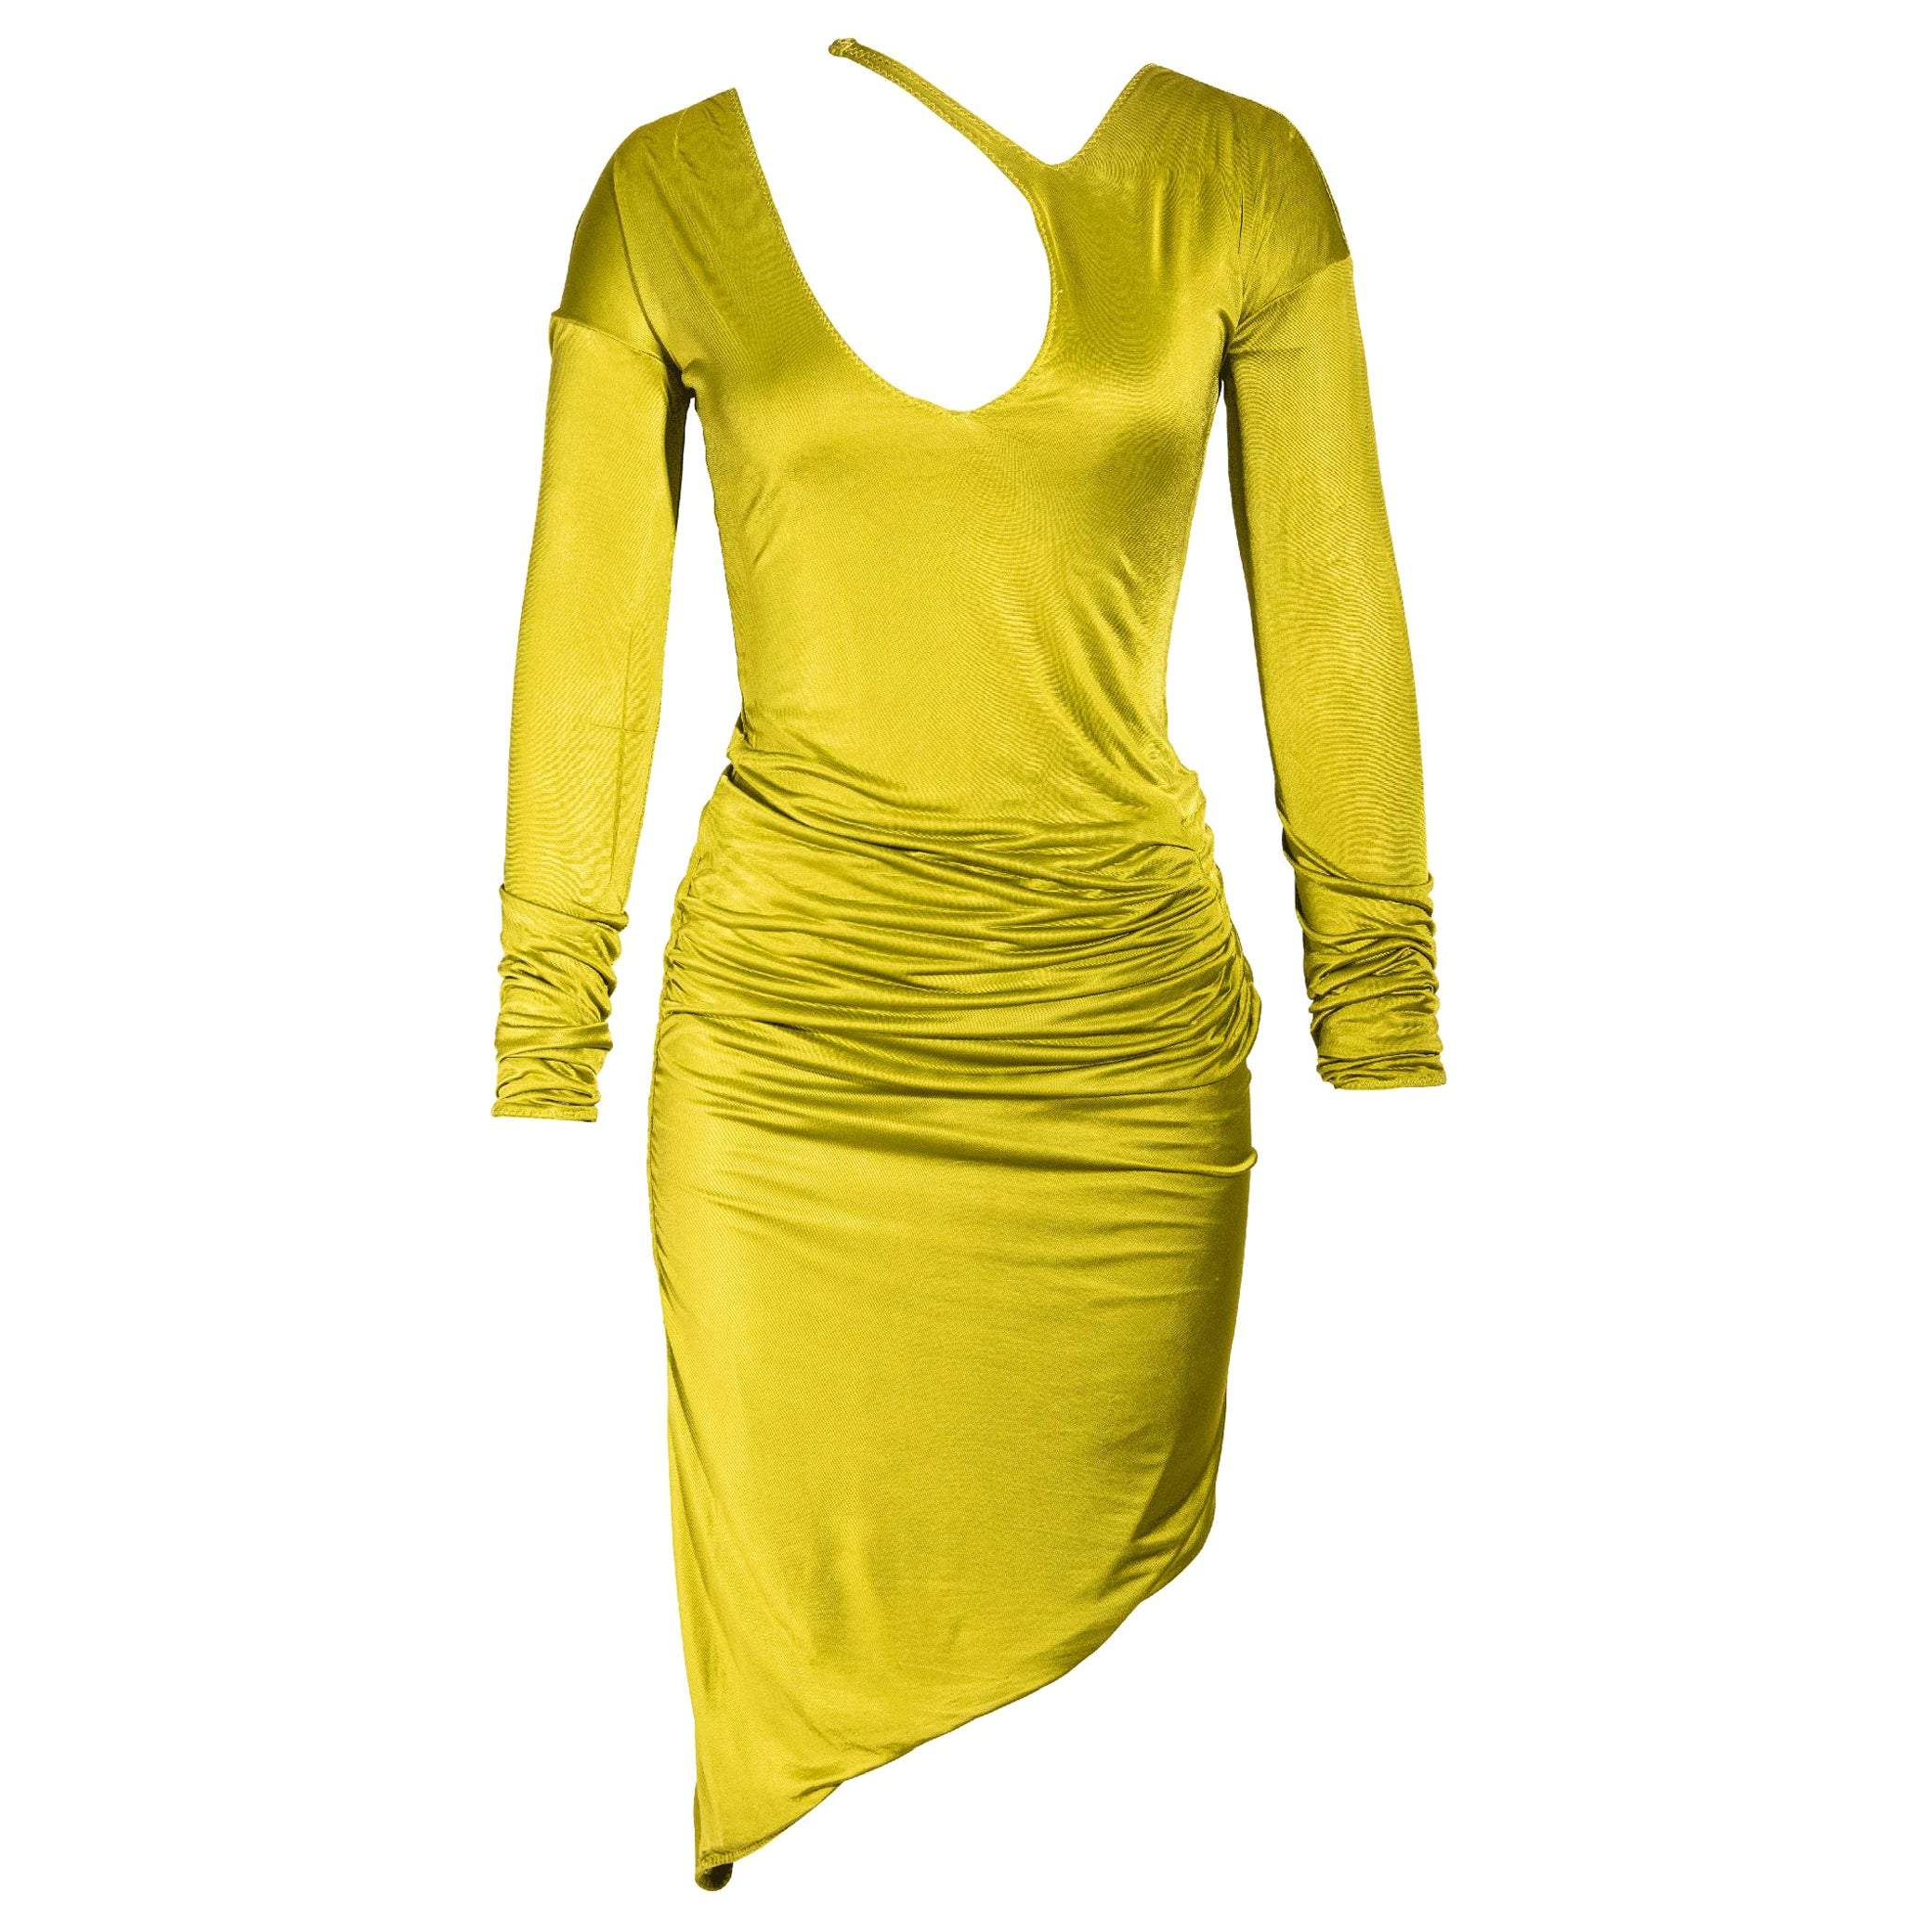 c. 2003 Gucci by Tom Ford Asymmetrical Chartreuse Long Sleeve Dress